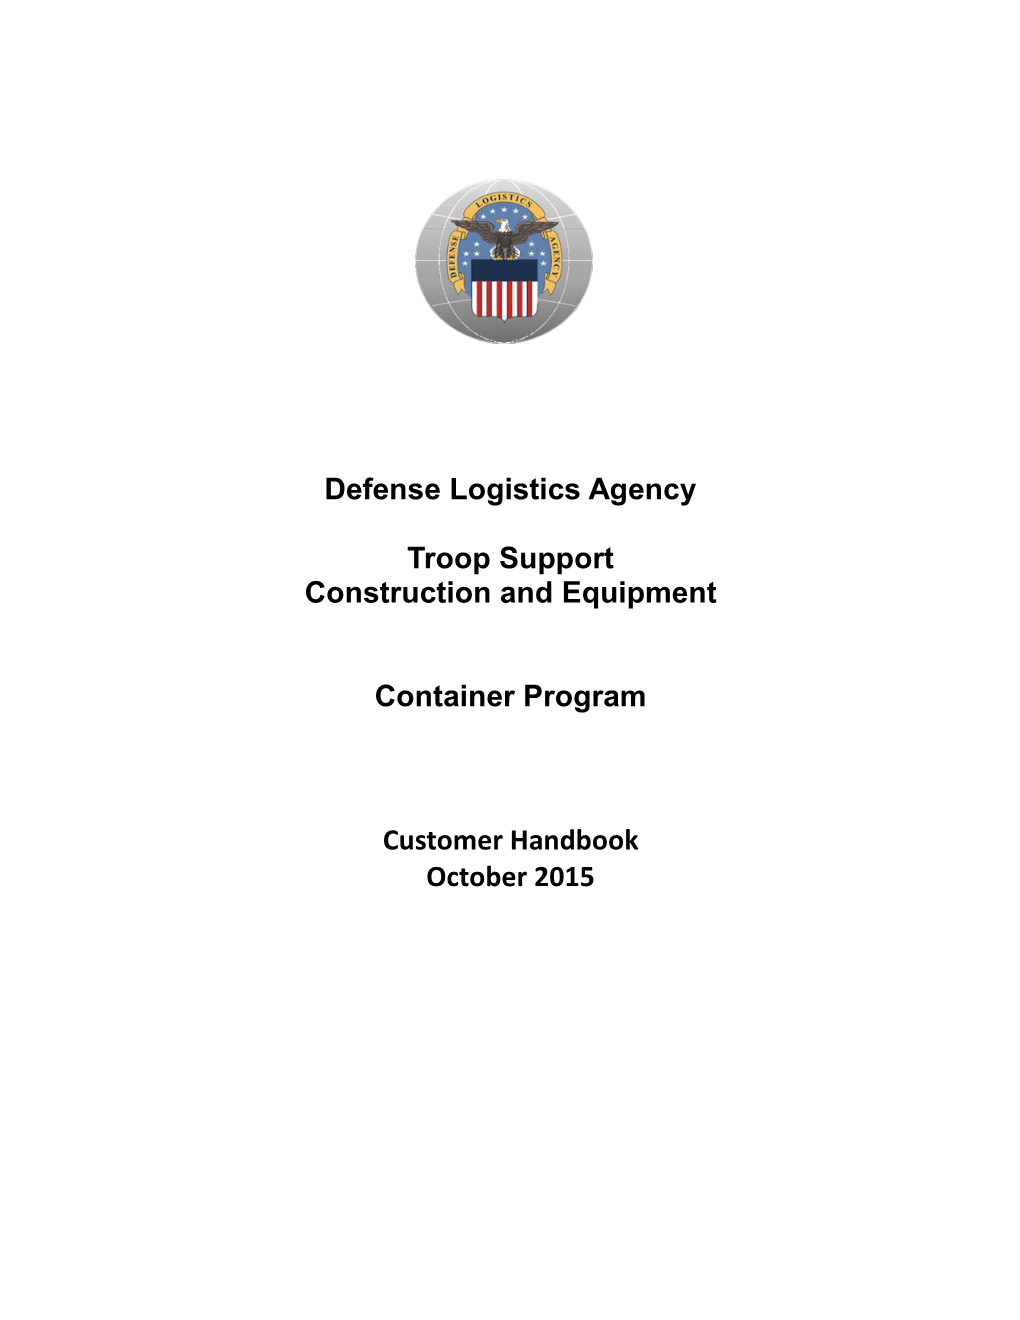 Defense Logistics Agency Troop Support Construction And